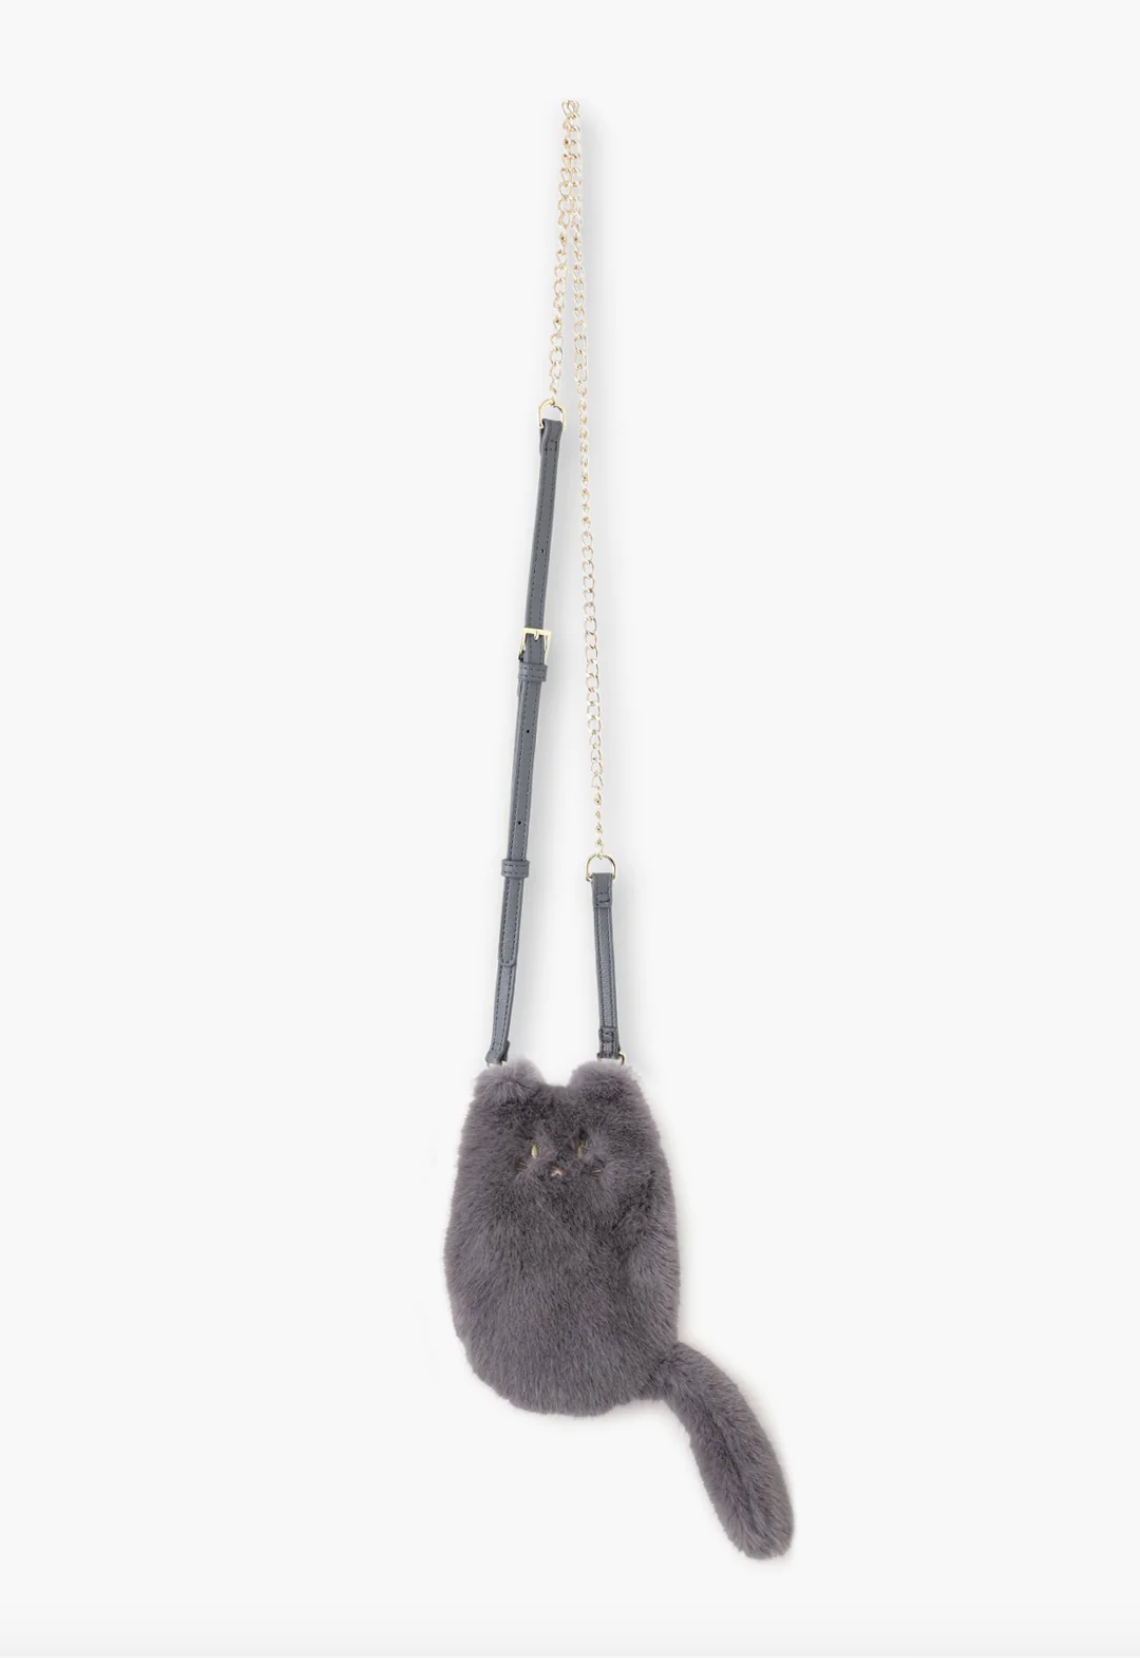 Crossbody Bag Finished in a fuzzy grey faux fur adding the illusion of the bag resembling a kitten